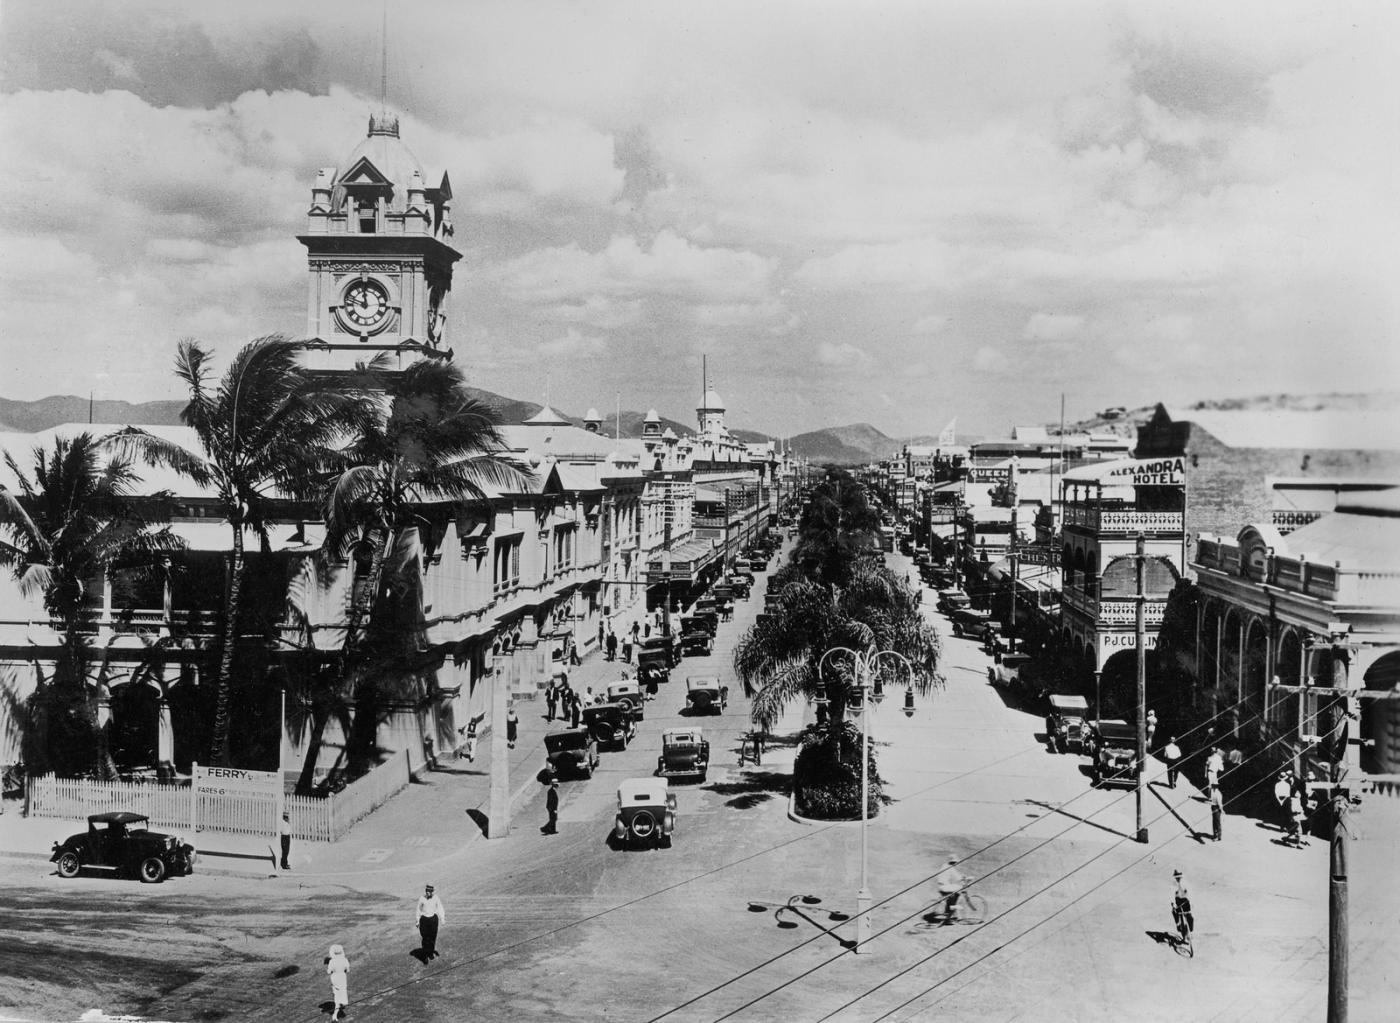 View of Townsville's Flinders Street with hundreds gathered for a street procession in the early 1930s